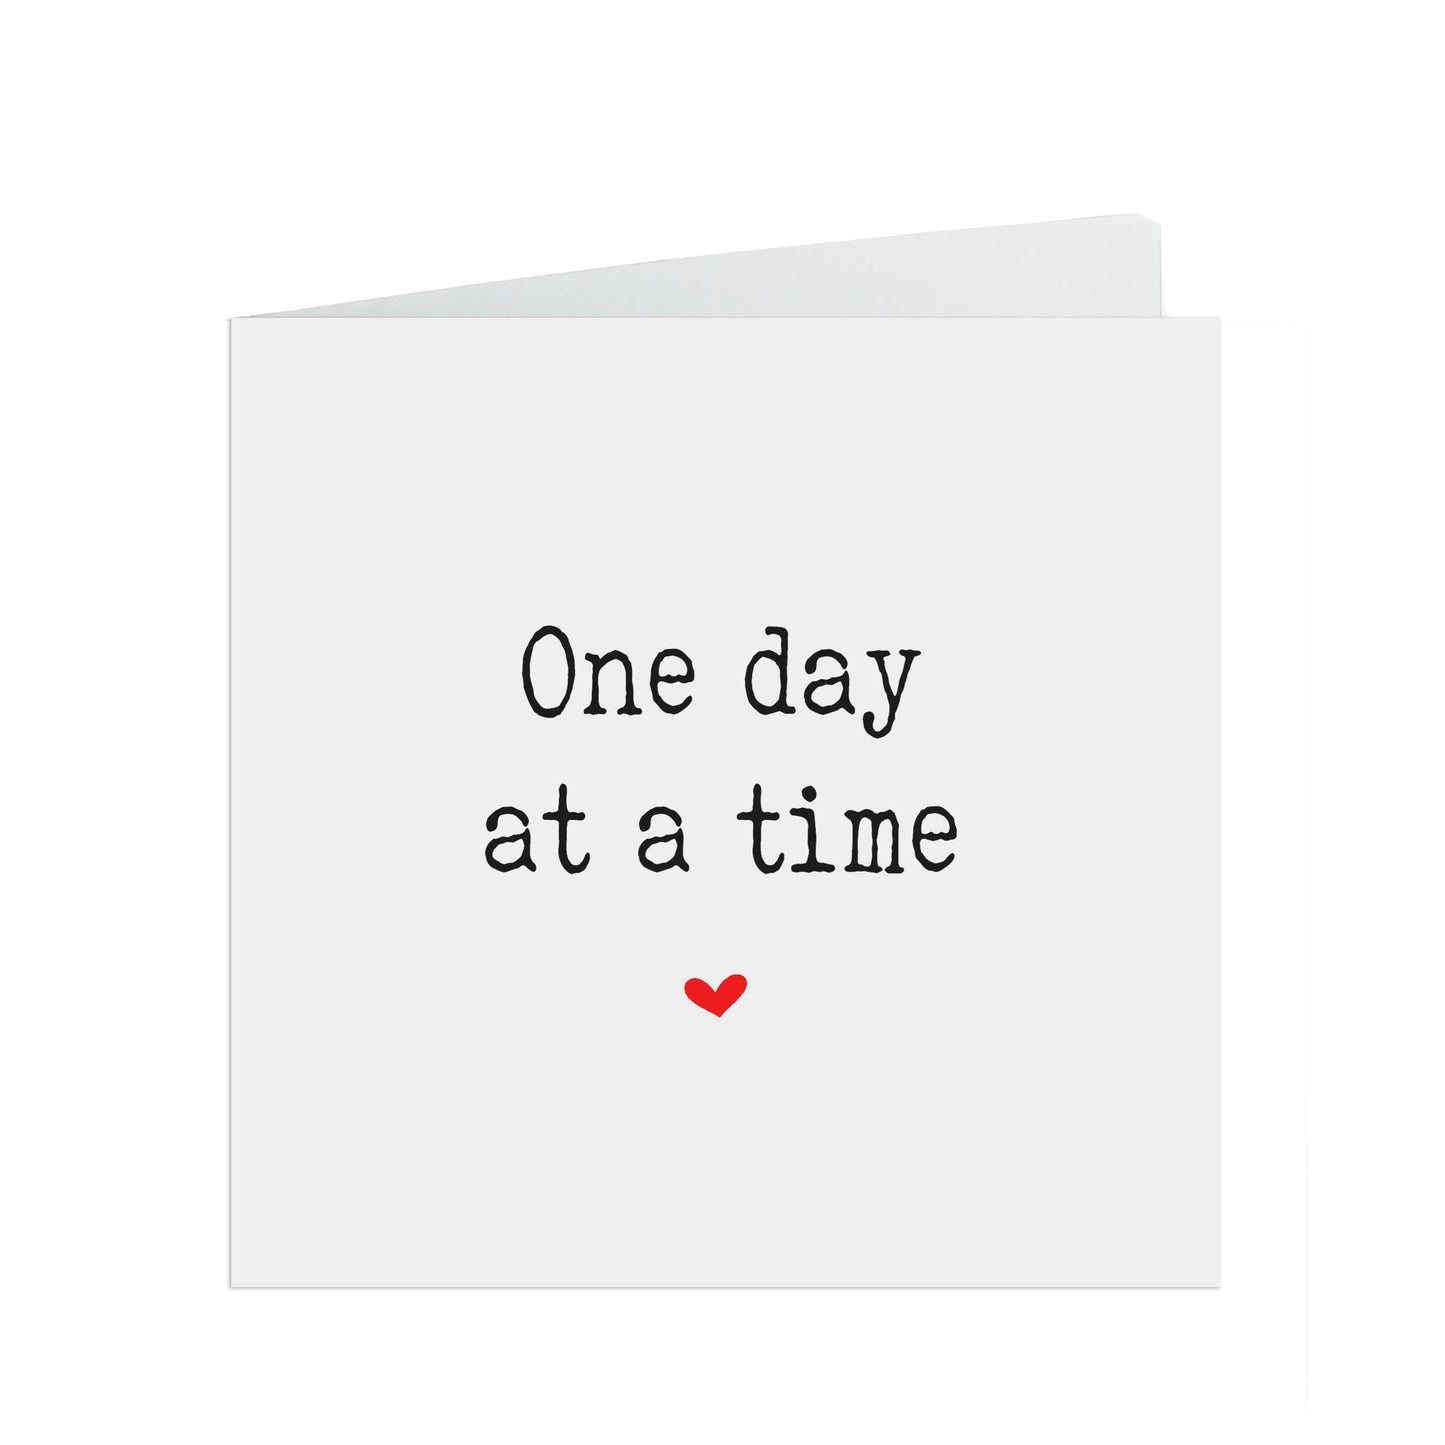 One Day At A Time, Motivation, Encouragement Or Support Card